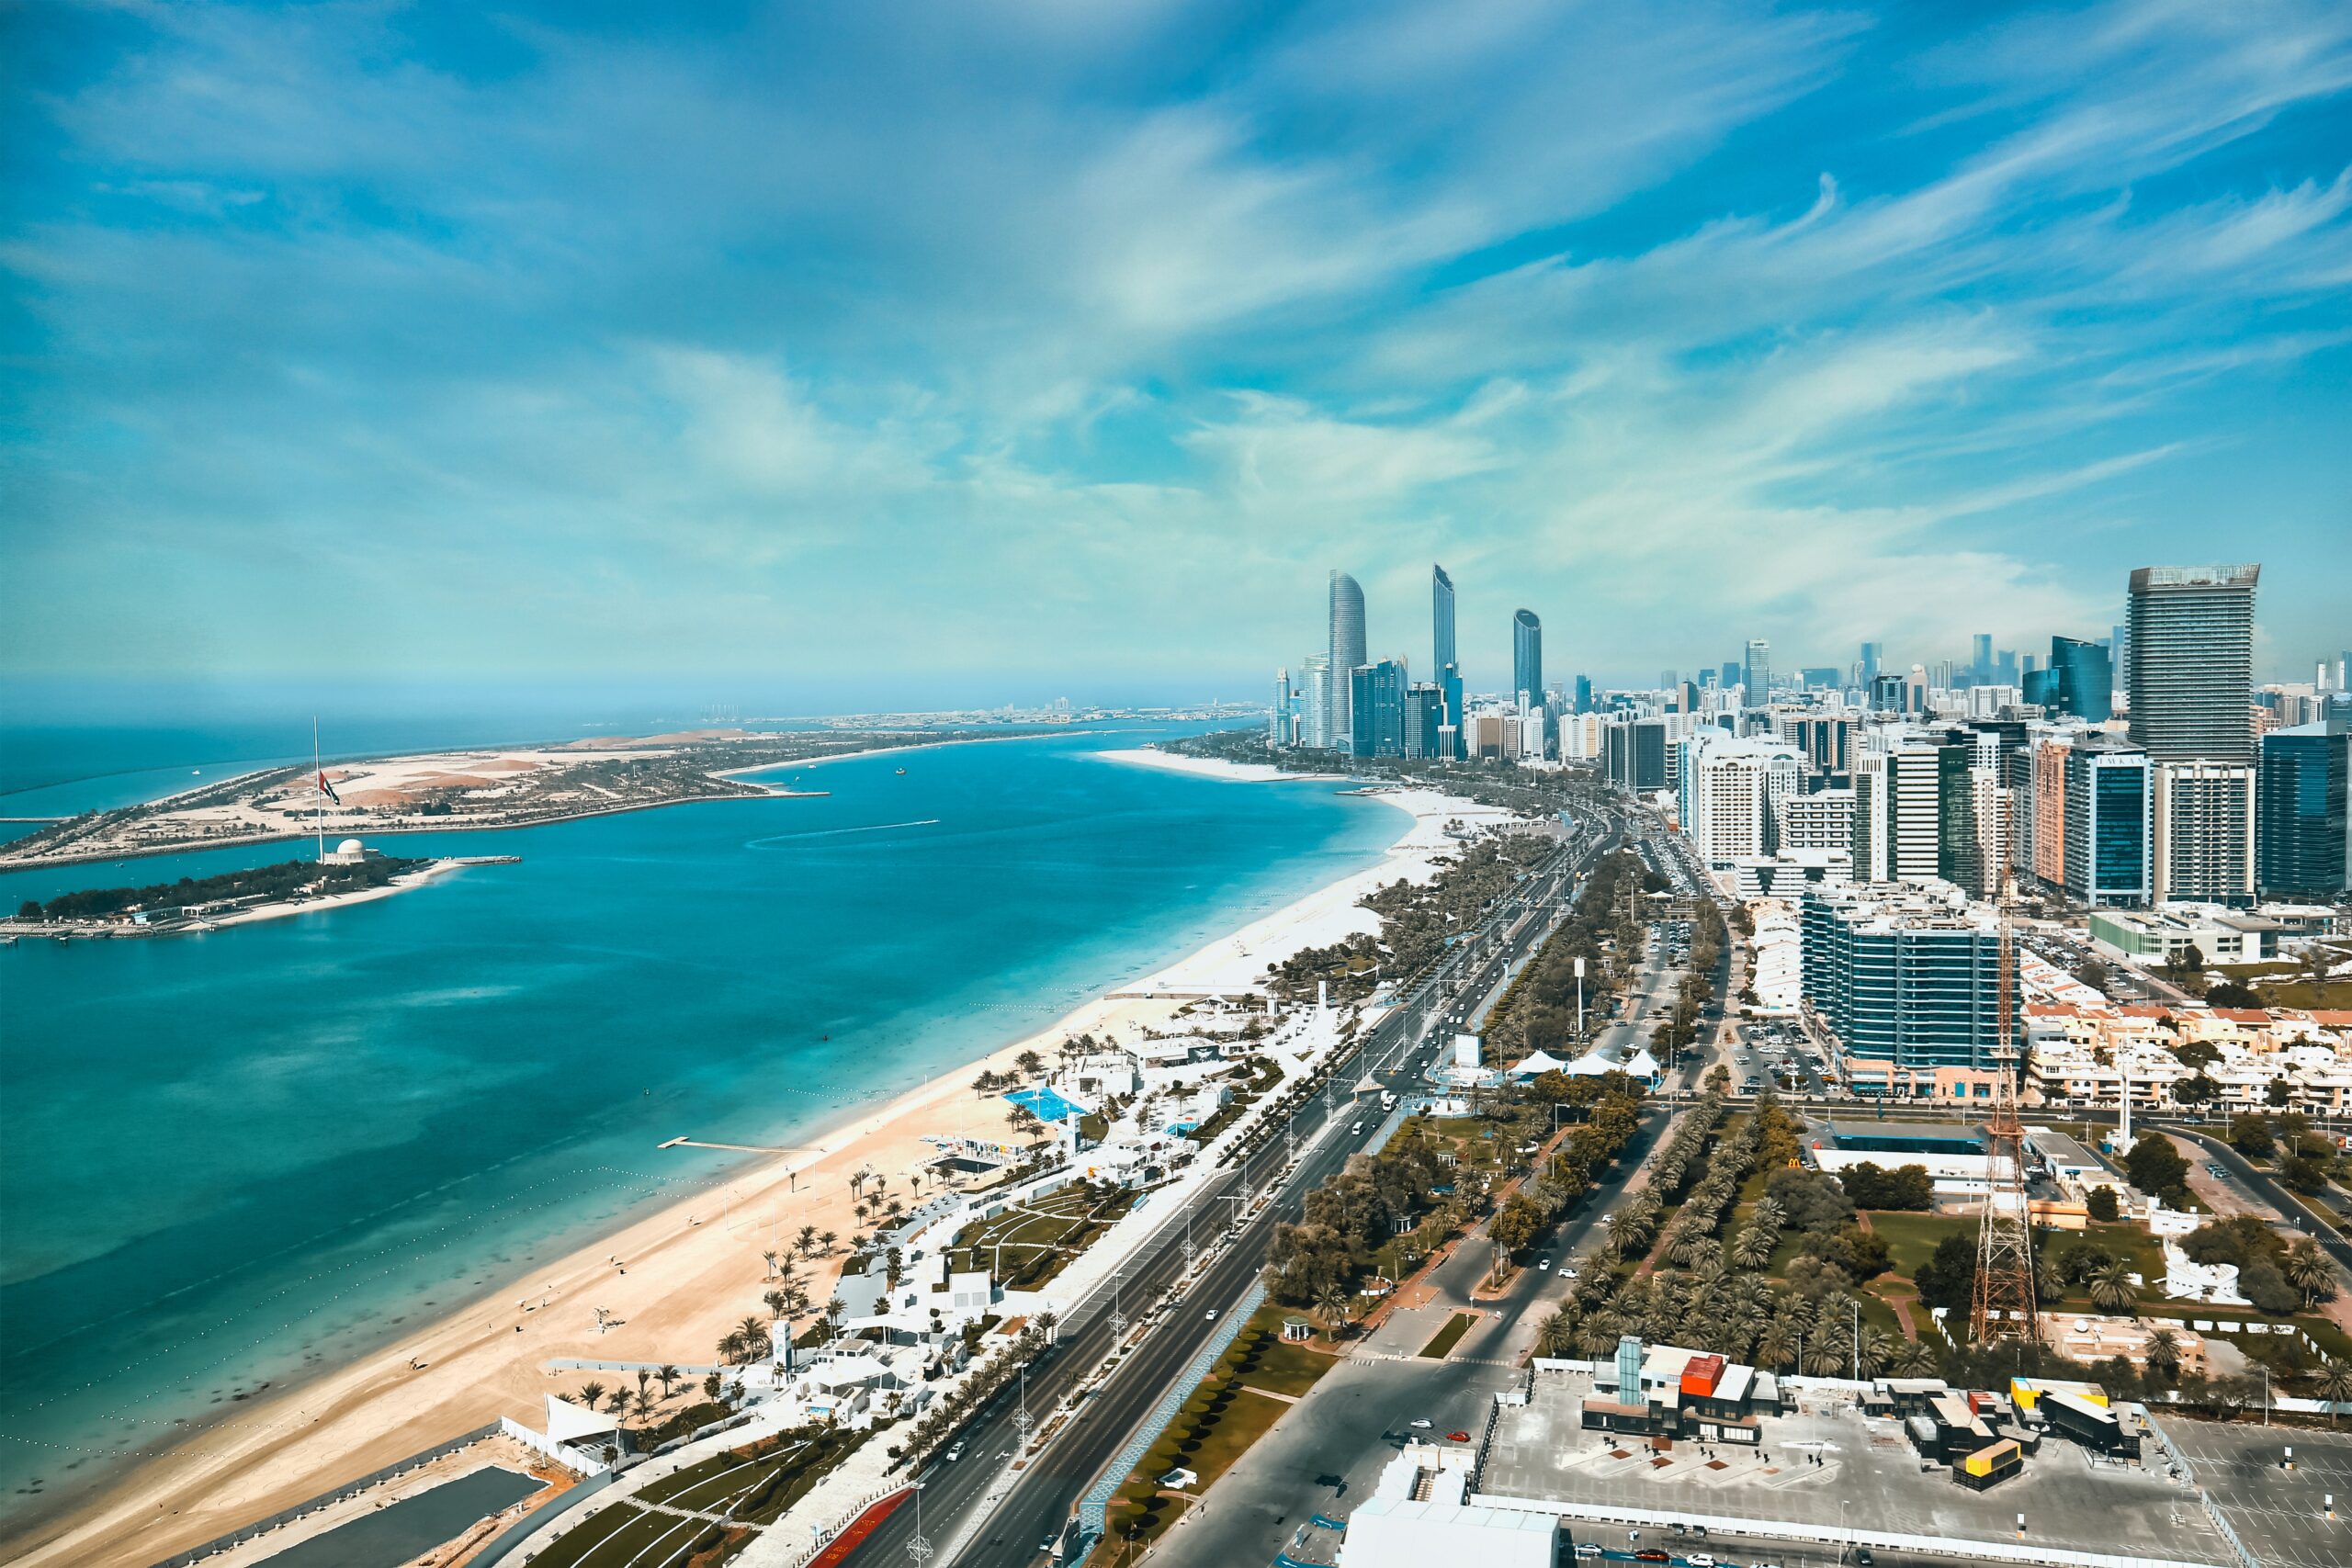 Top 20 Attractive Sights In Abu Dhabi